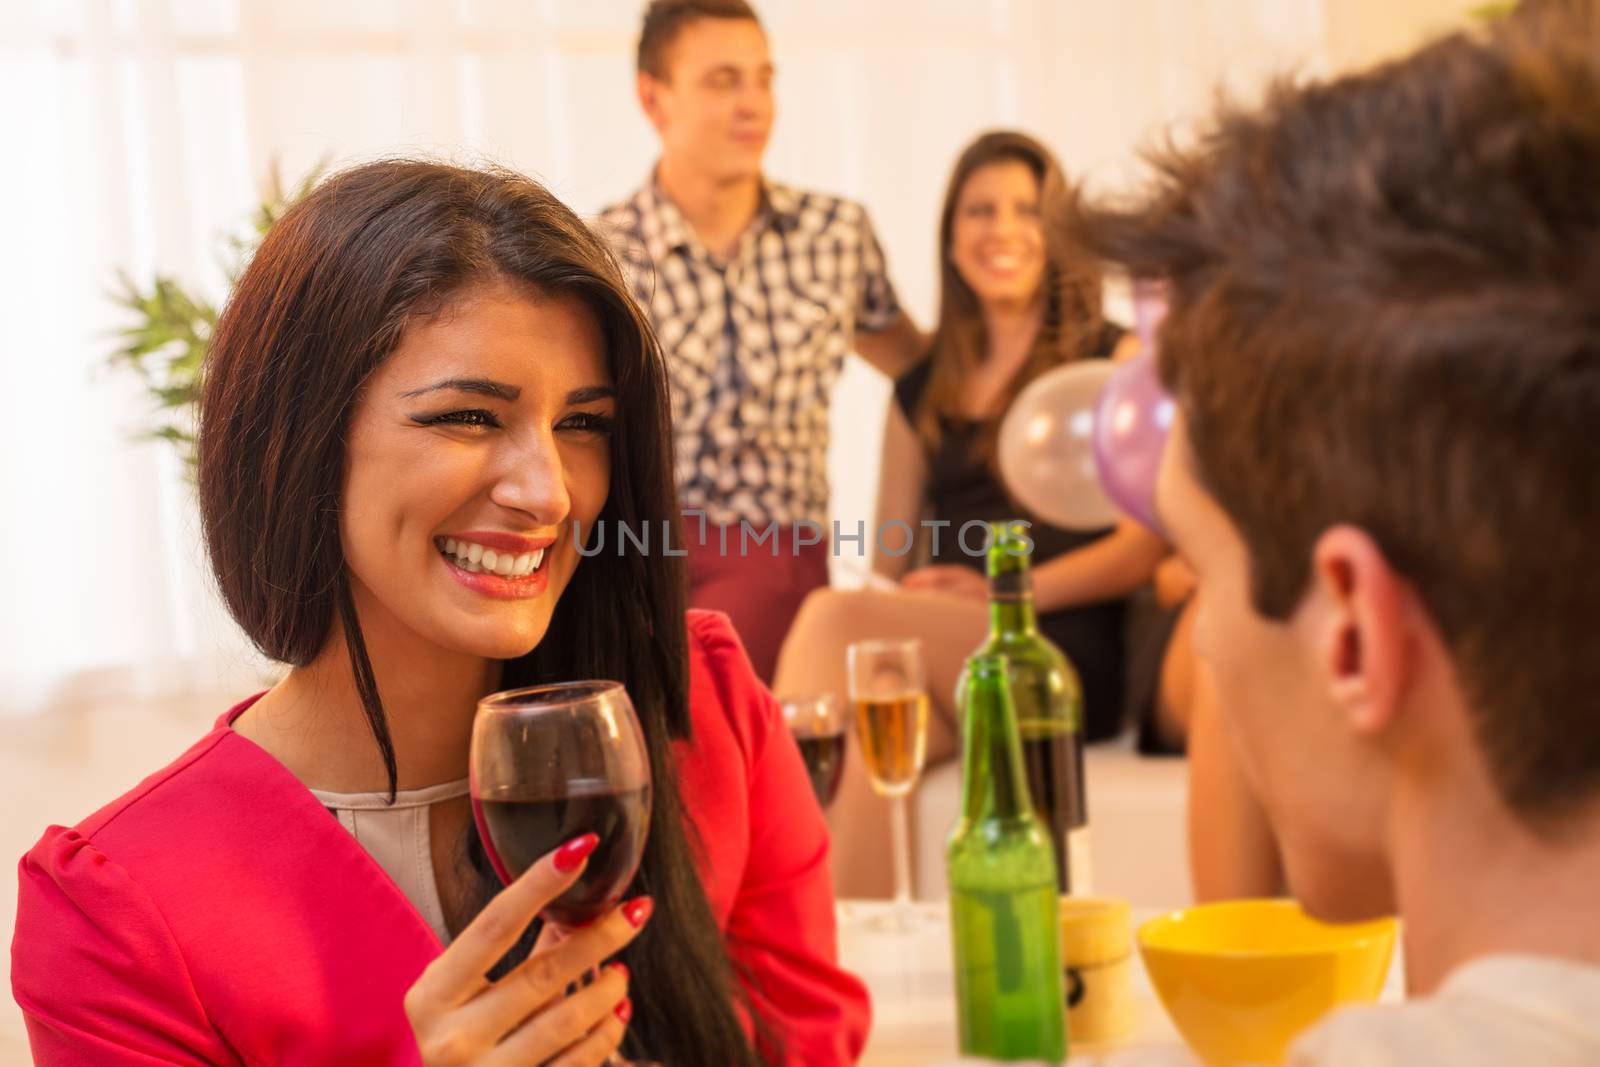 A young pretty girl with a glass of wine in hand, with a smile looking at the guy in front of her, while in the background see another young couple in the ambient house parties.